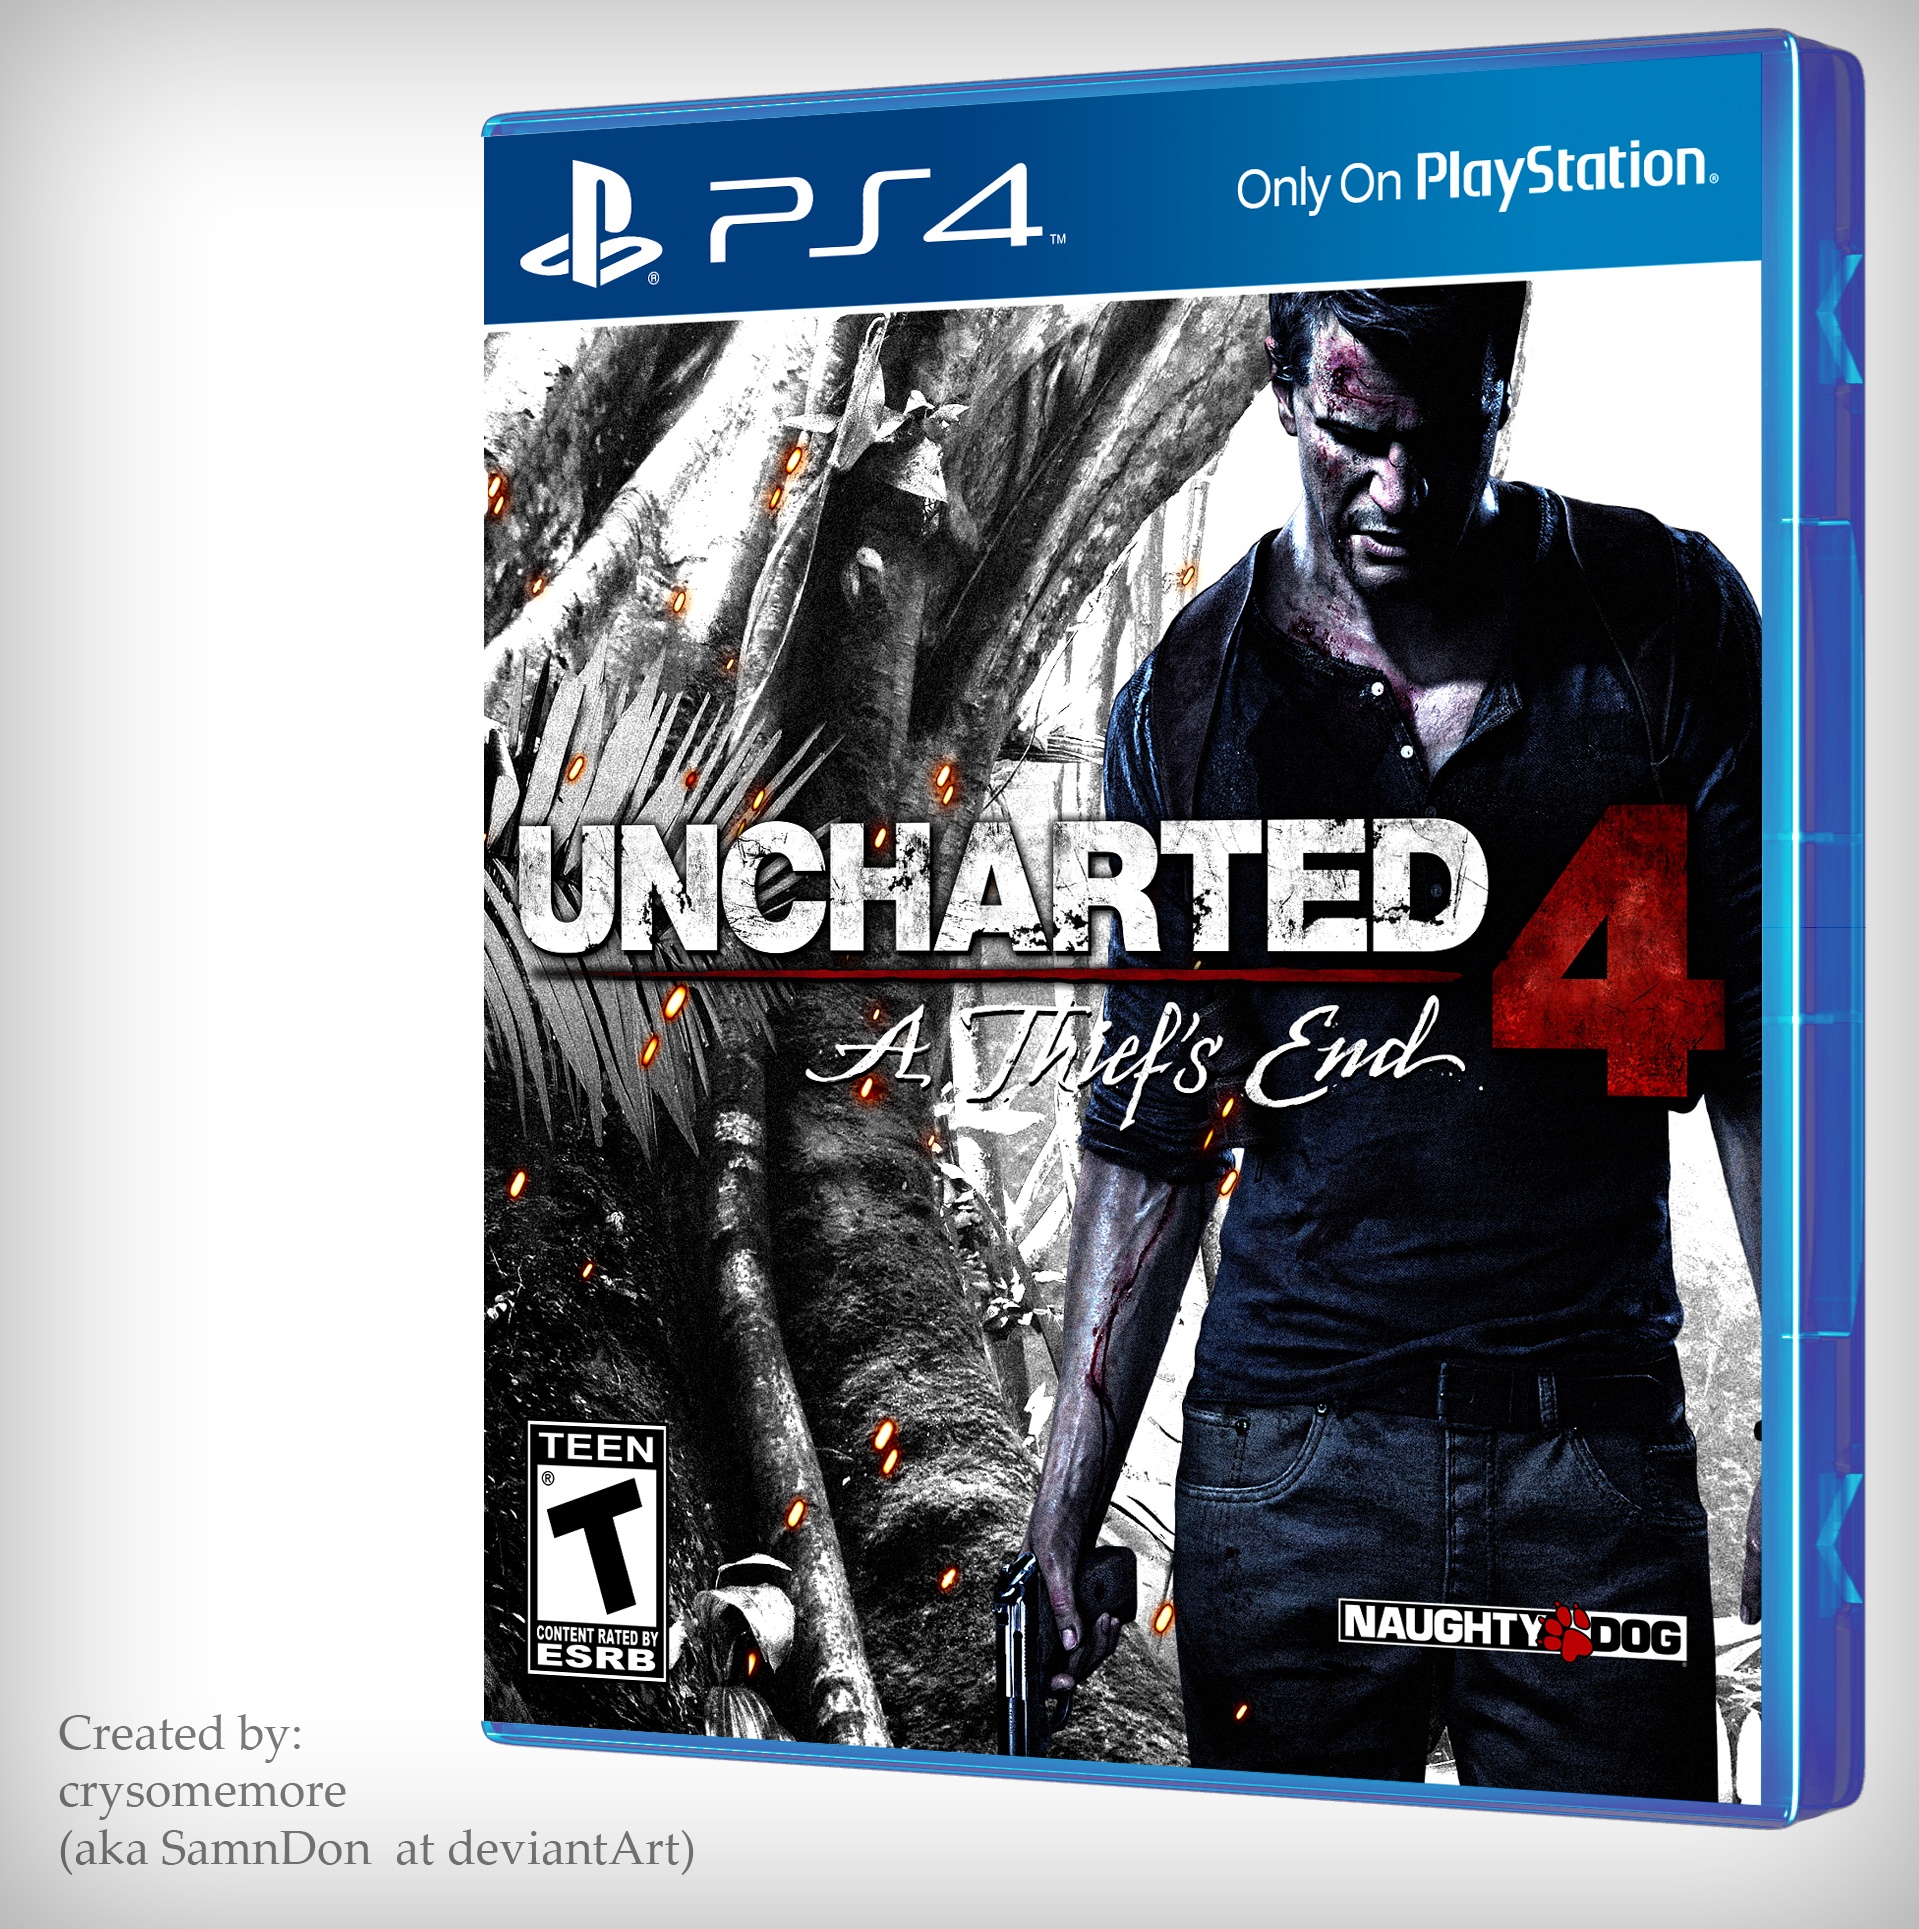 Uncharted 4: A Thief's End box cover